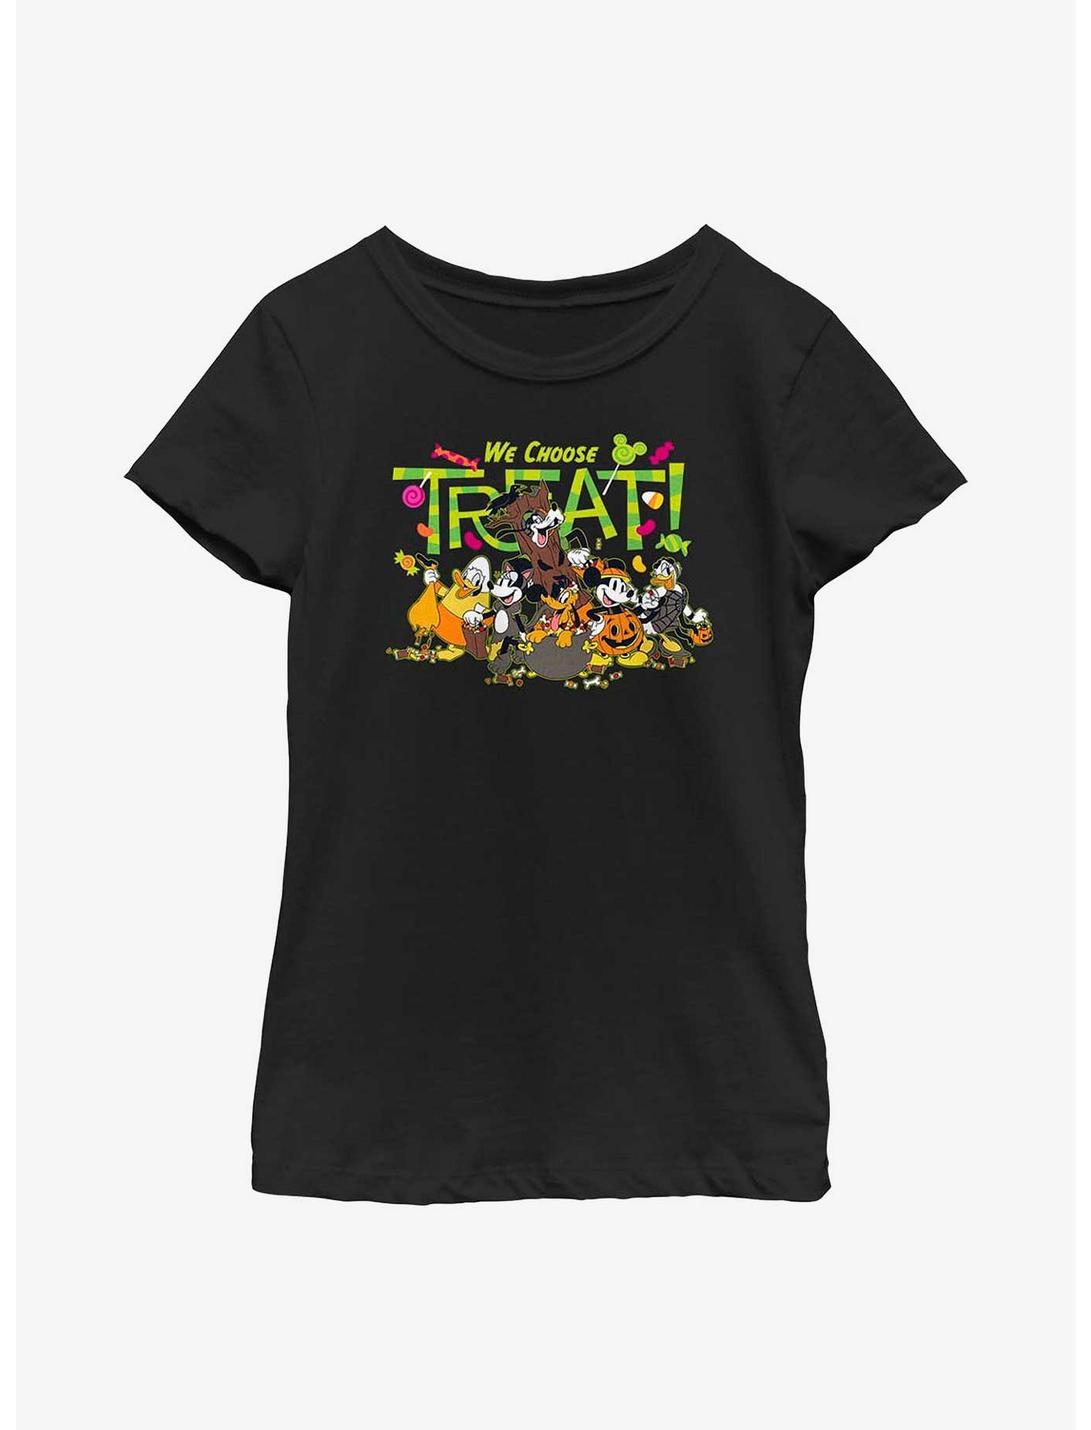 Disney Mickey Mouse & Friends We Choose Treat Youth Girls T-Shirt, BLACK, hi-res